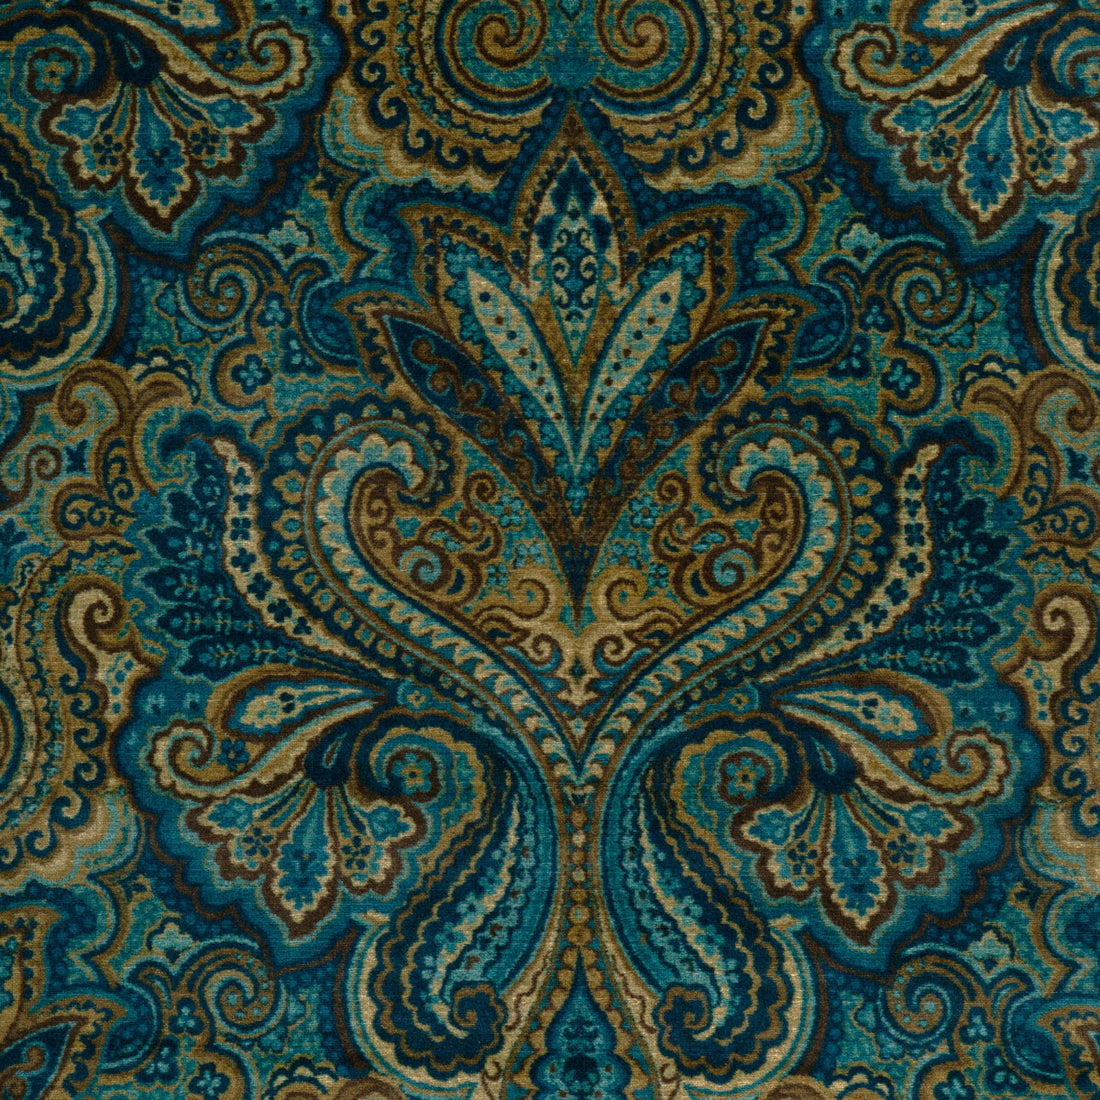 Carswell Velvet fabric in marine/sky color - pattern 2023113.55.0 - by Lee Jofa in the Barwick Velvets collection